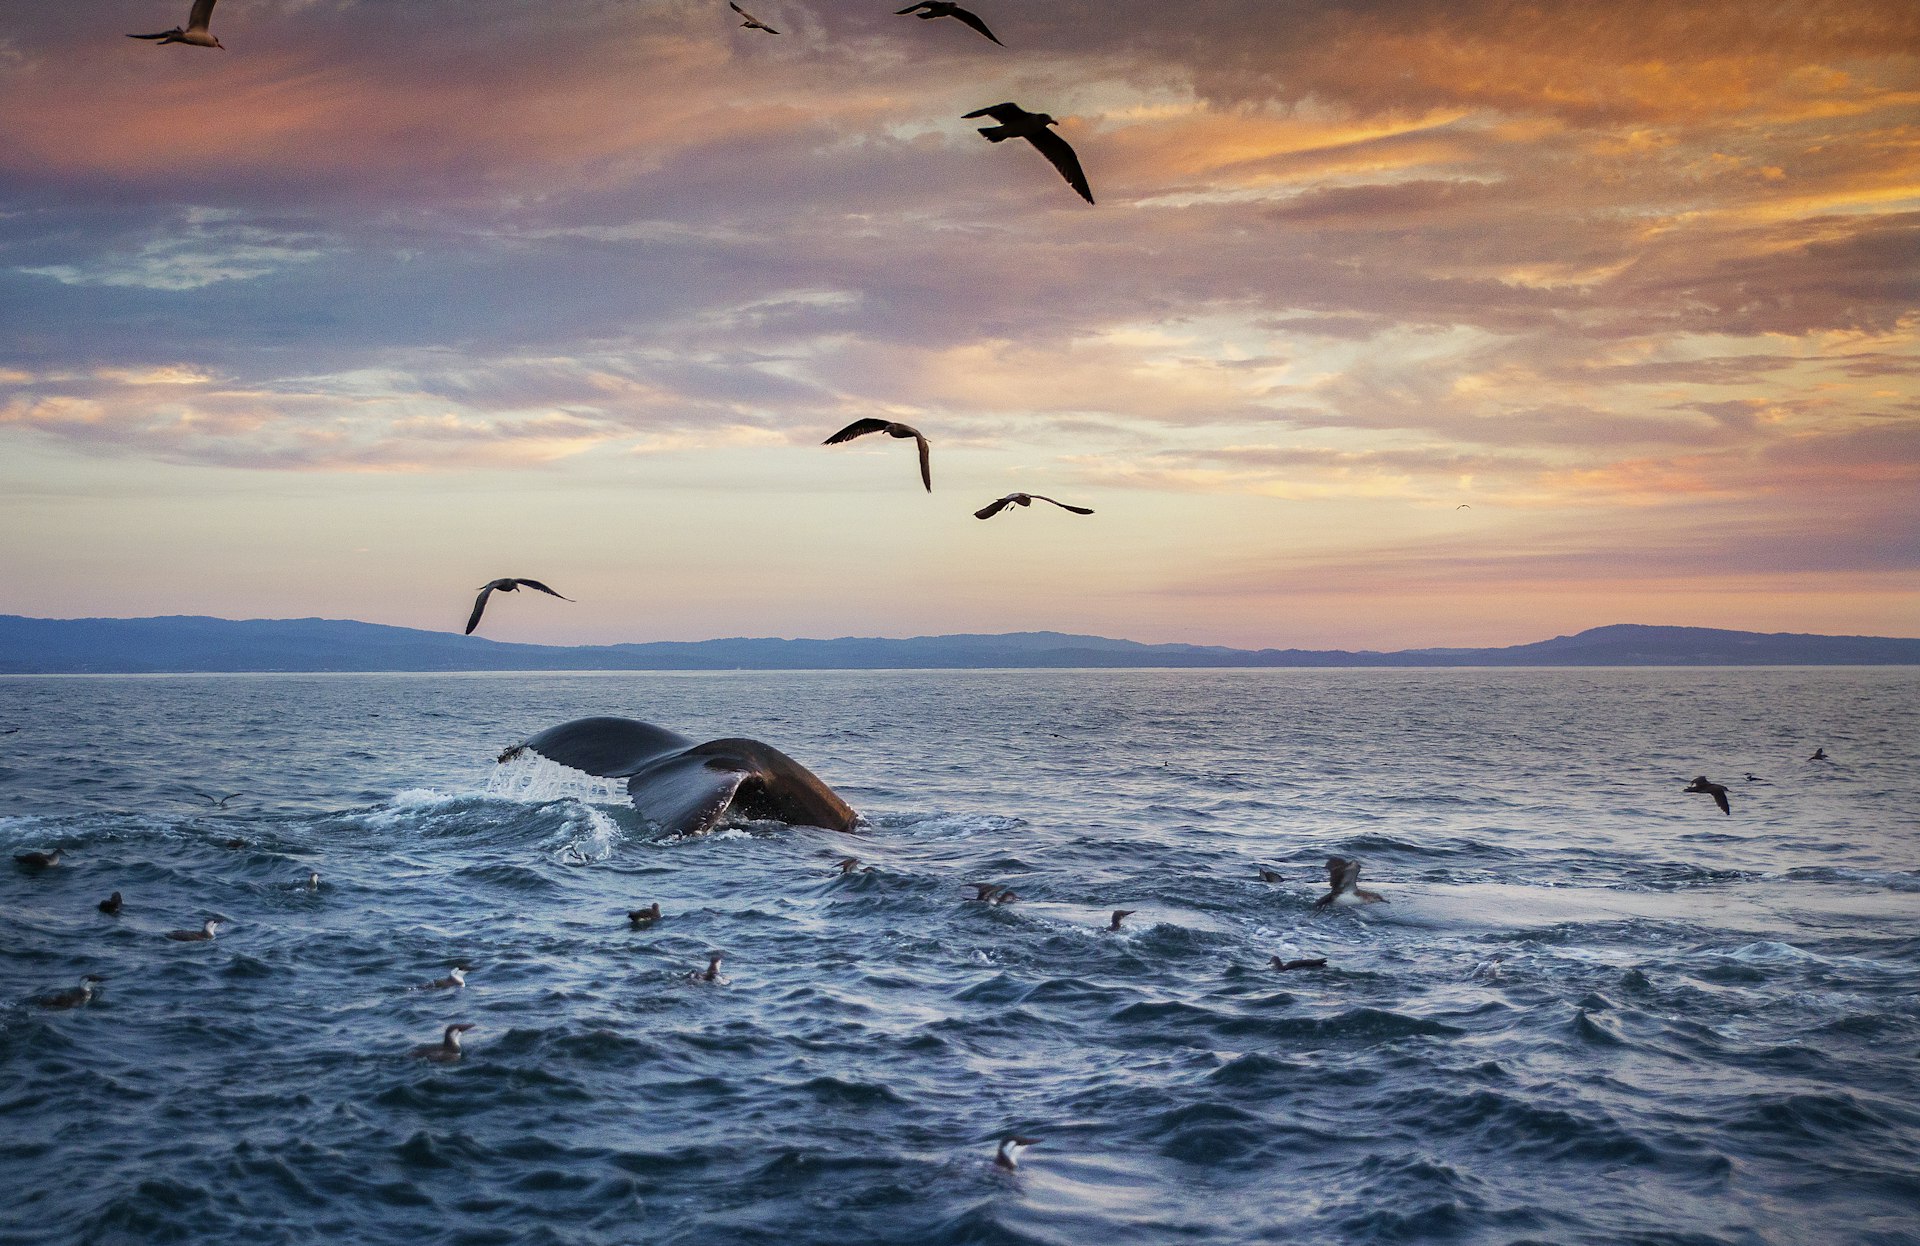 The tail of a humpback whale rises above a flock of birds and the Pacific Ocean near Monterey Bay, California